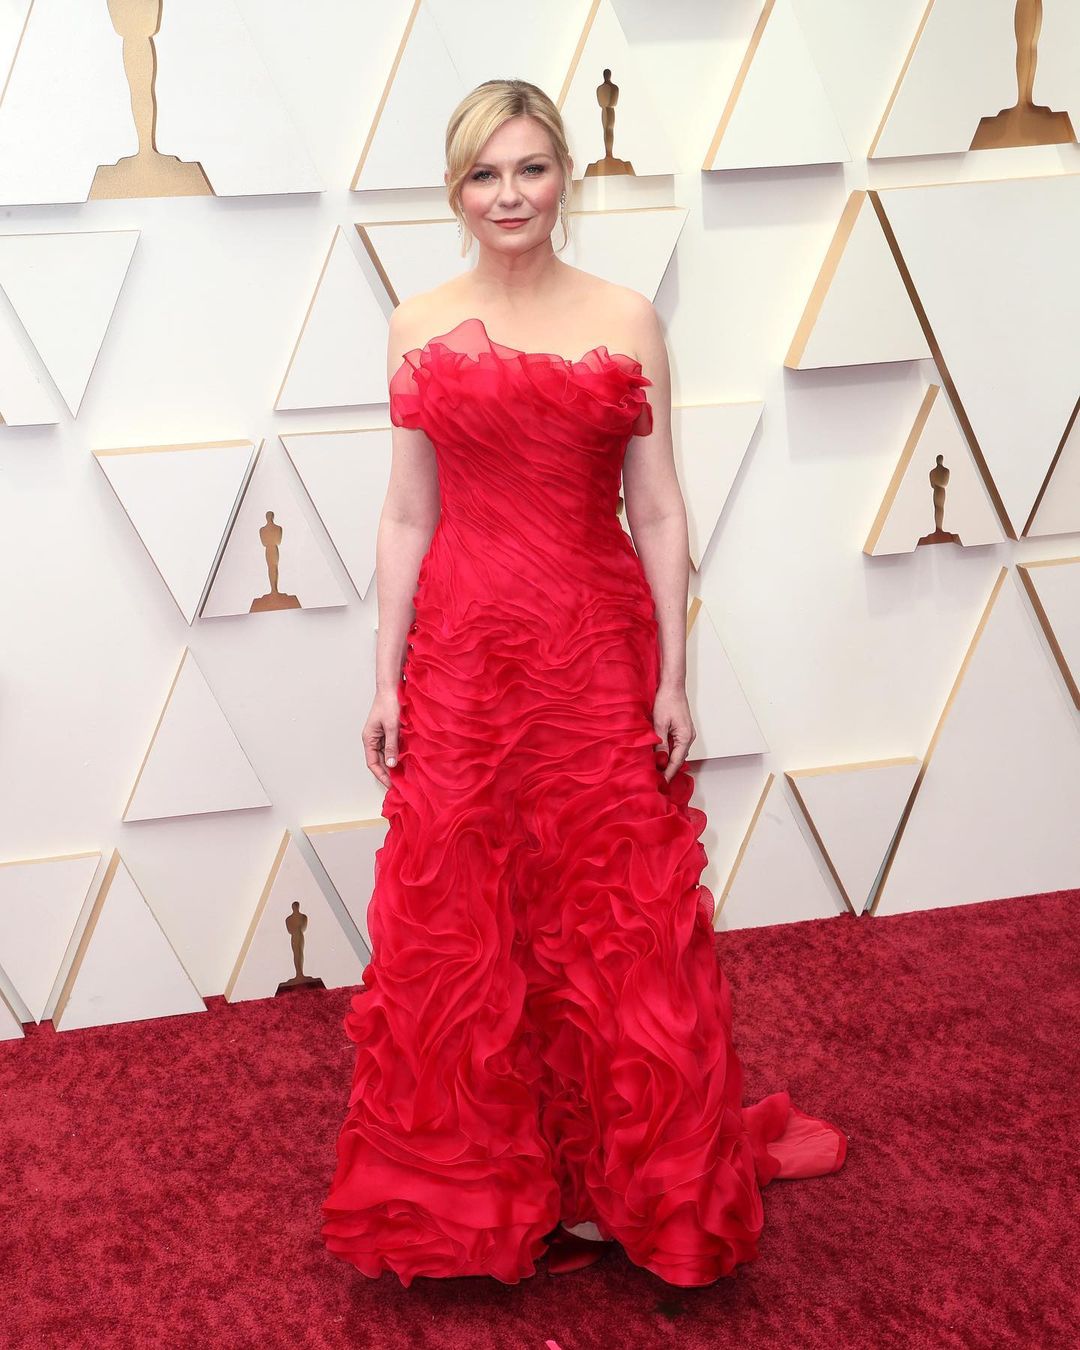 Kirsten Dunst looks spectacular in the ruffled dress by Christian Lacroix